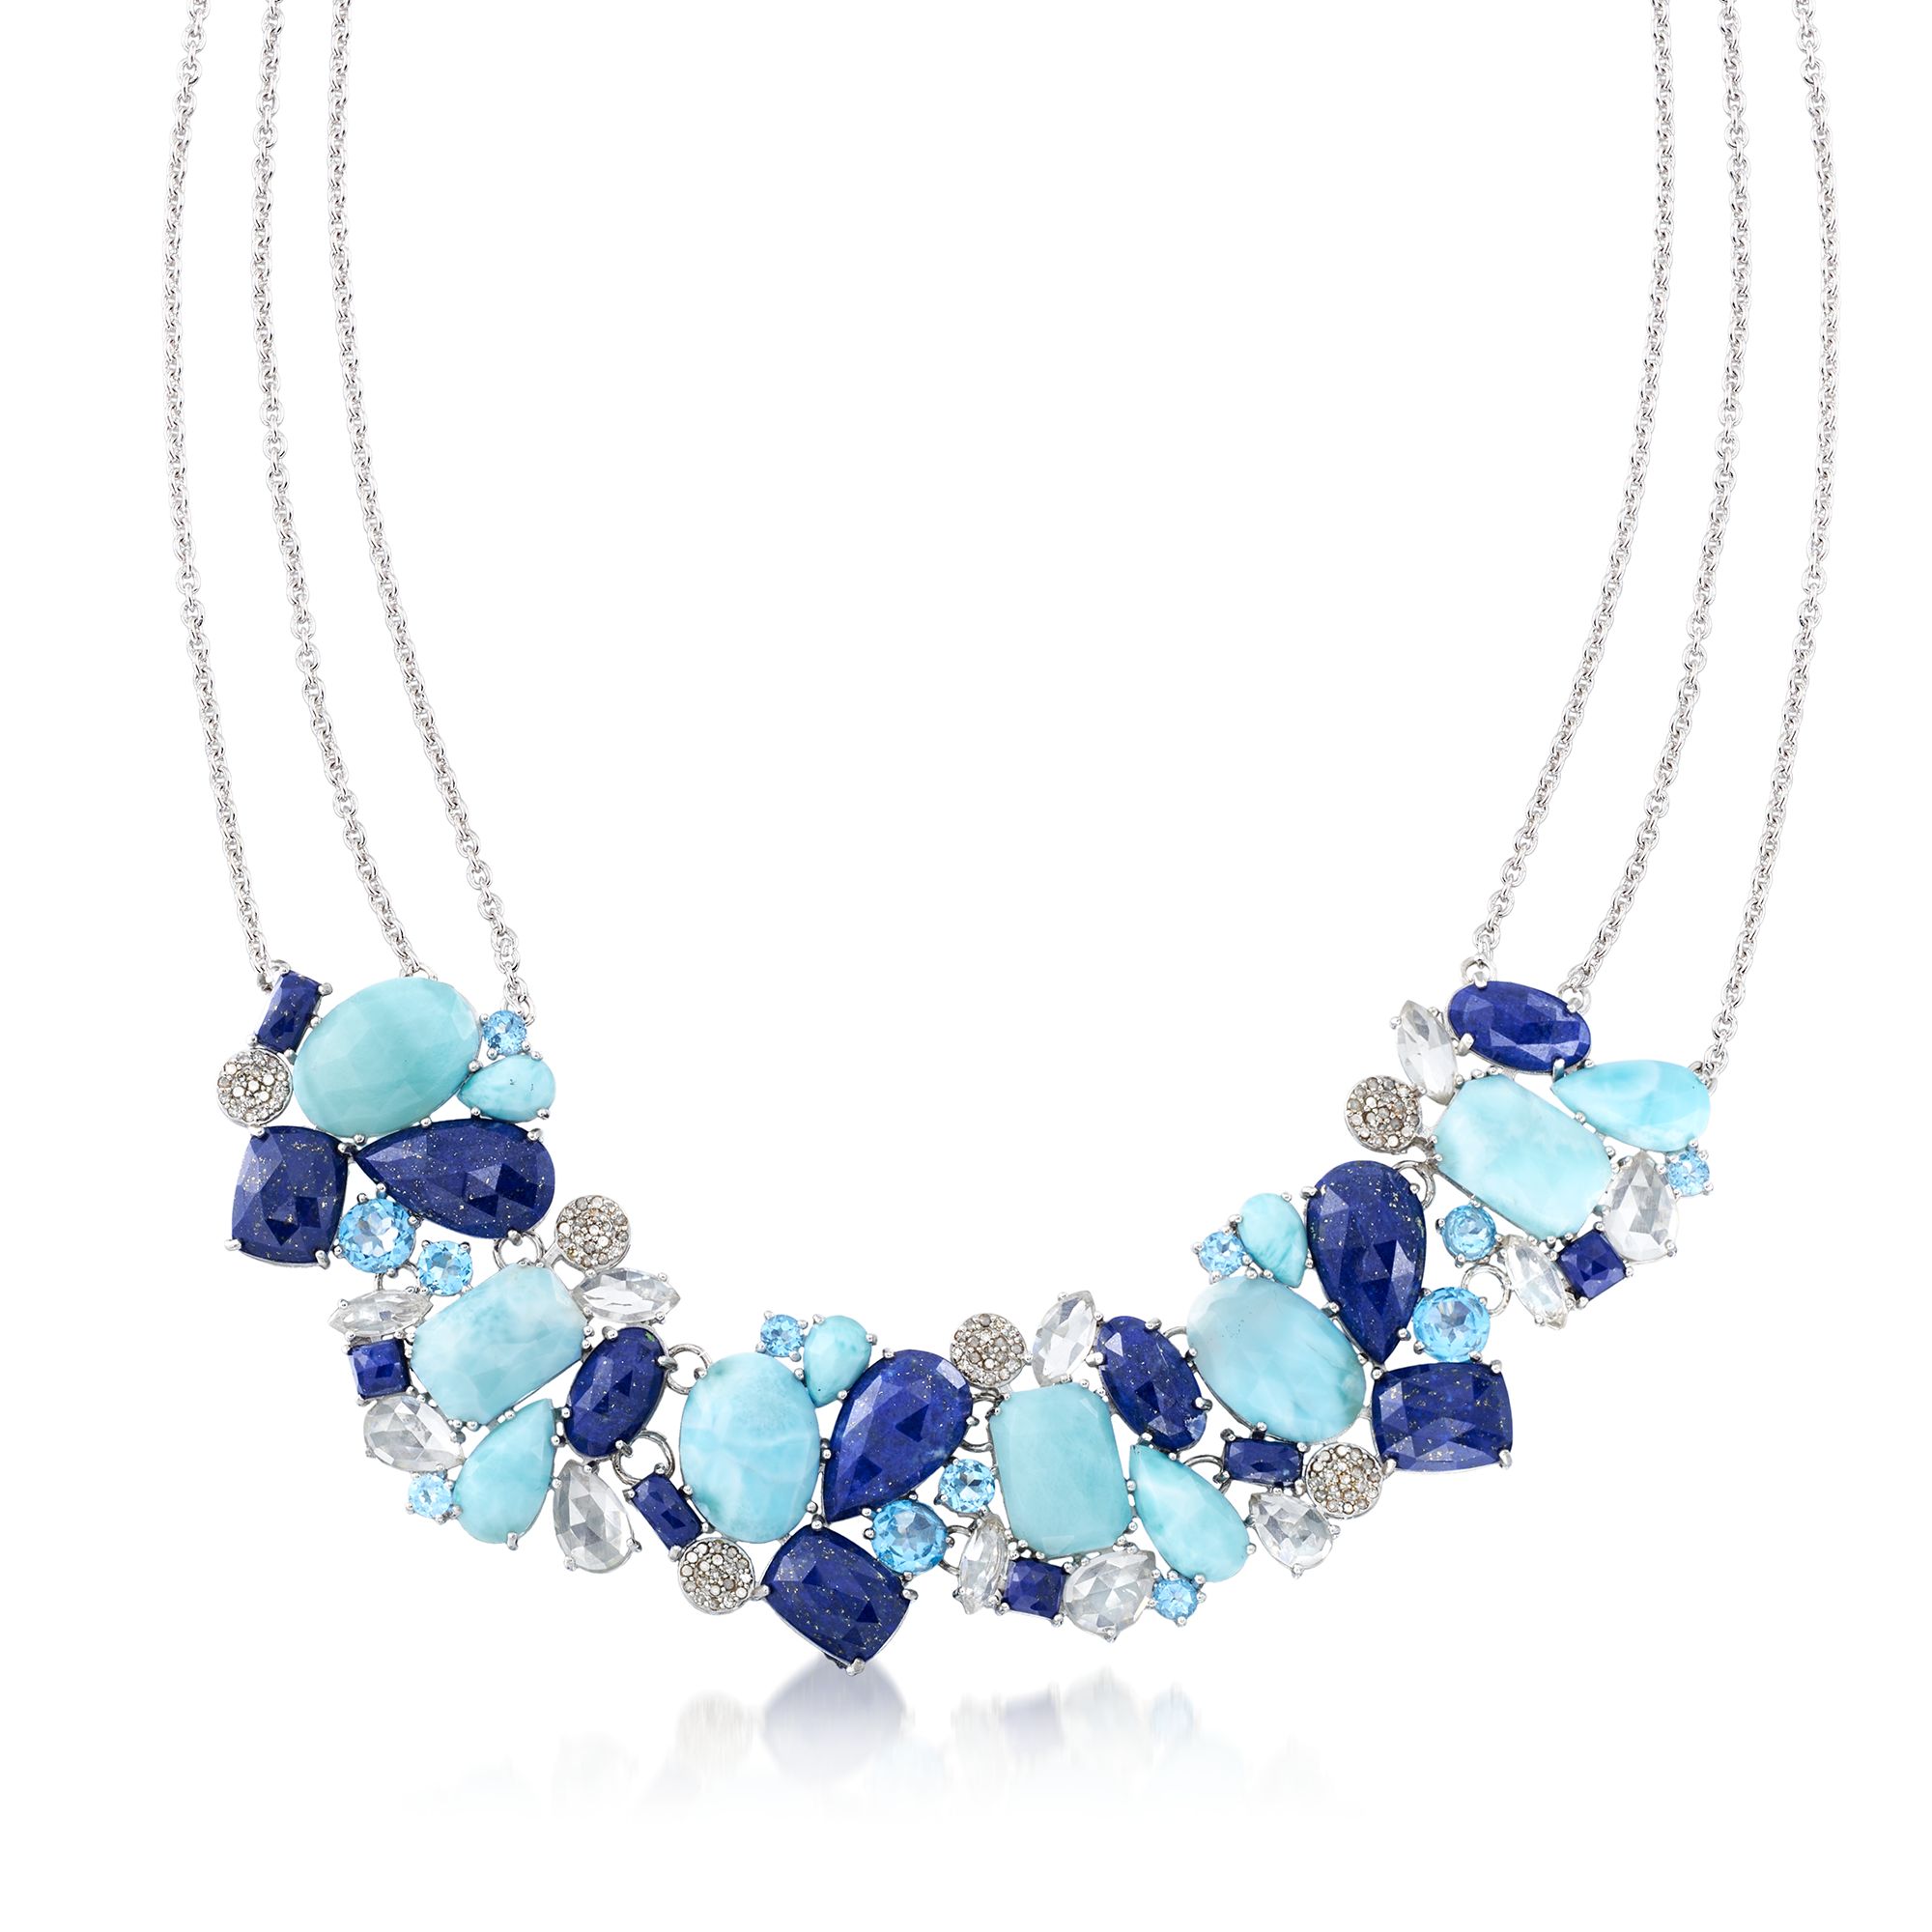 Blue and White Multi-Stone Necklace with 1.00 ct. t.w. Diamonds in 